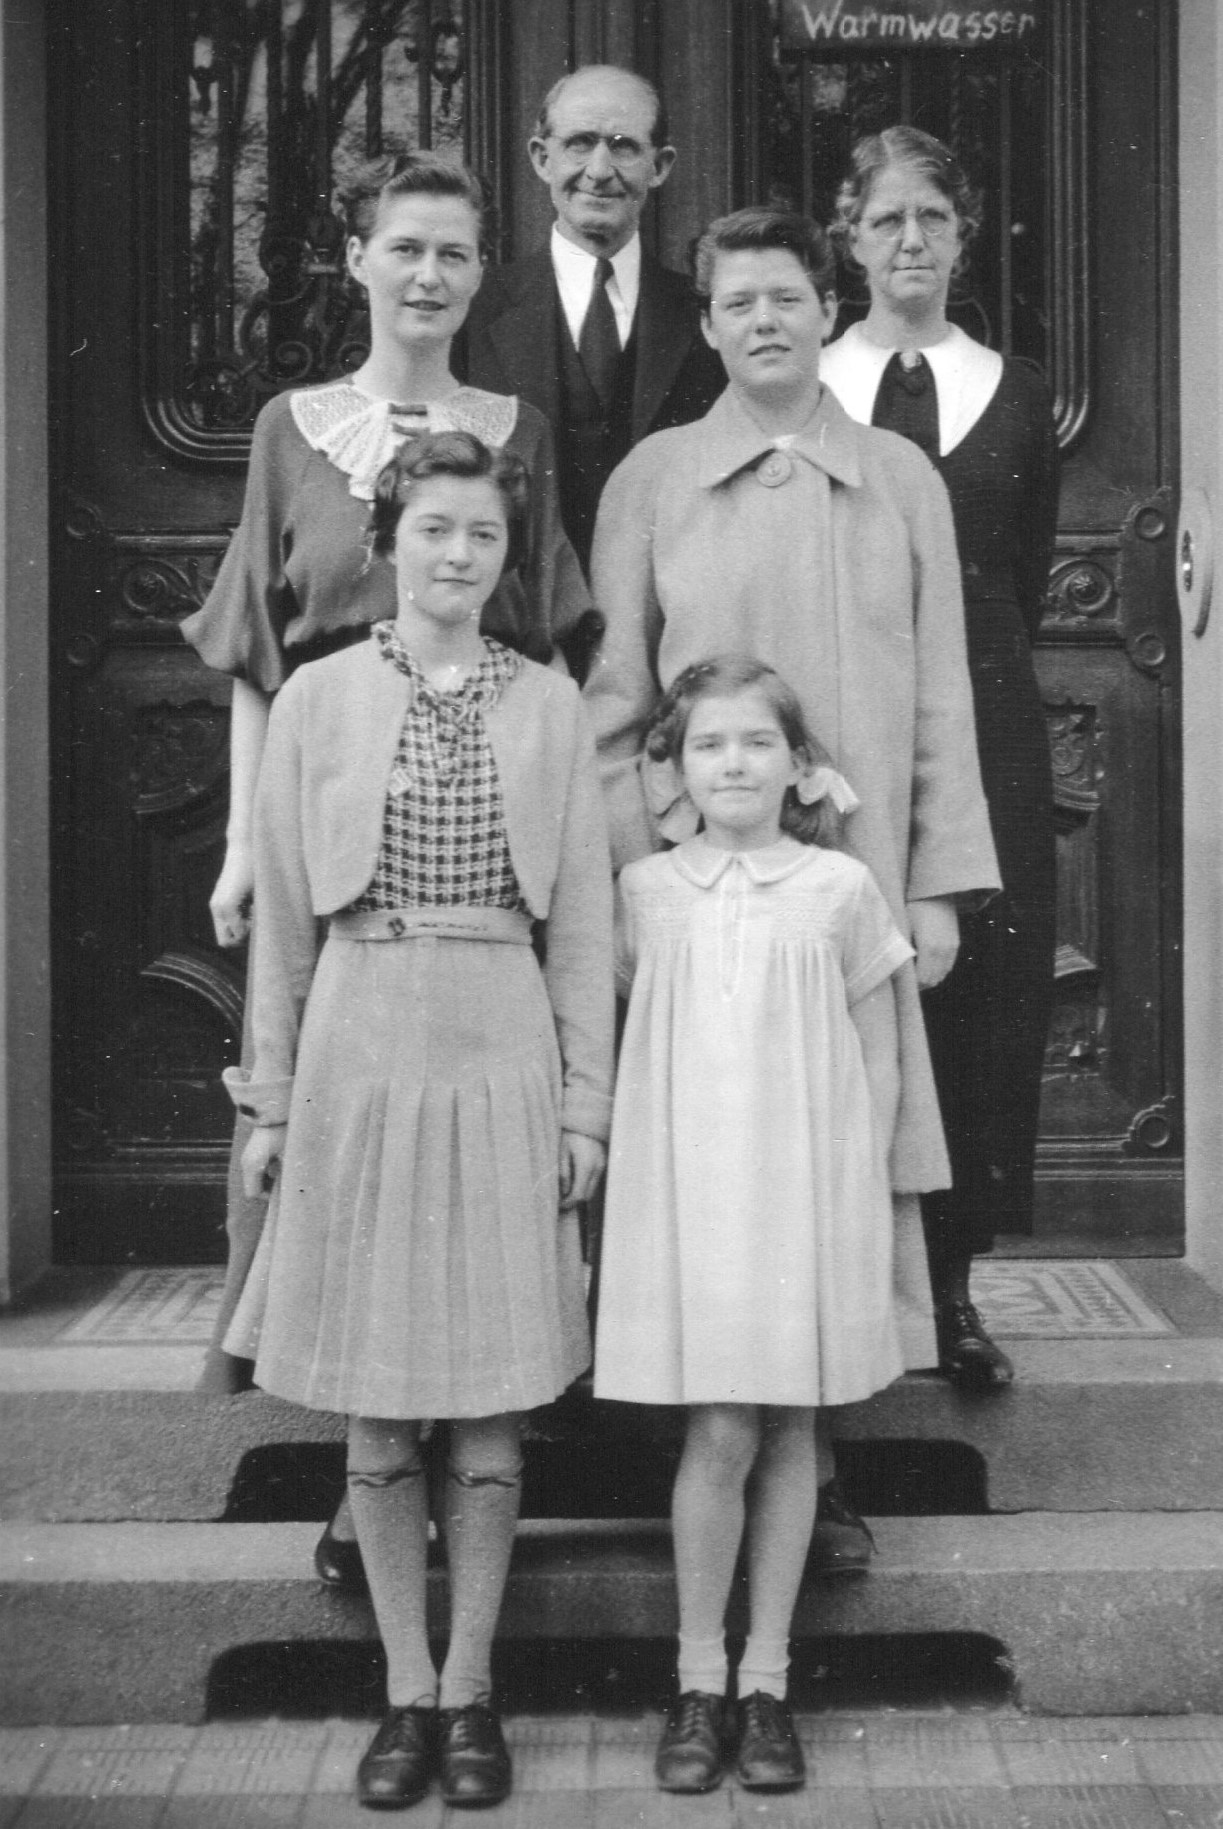 Roy Anson Welker mission president's family Germany ca 1935